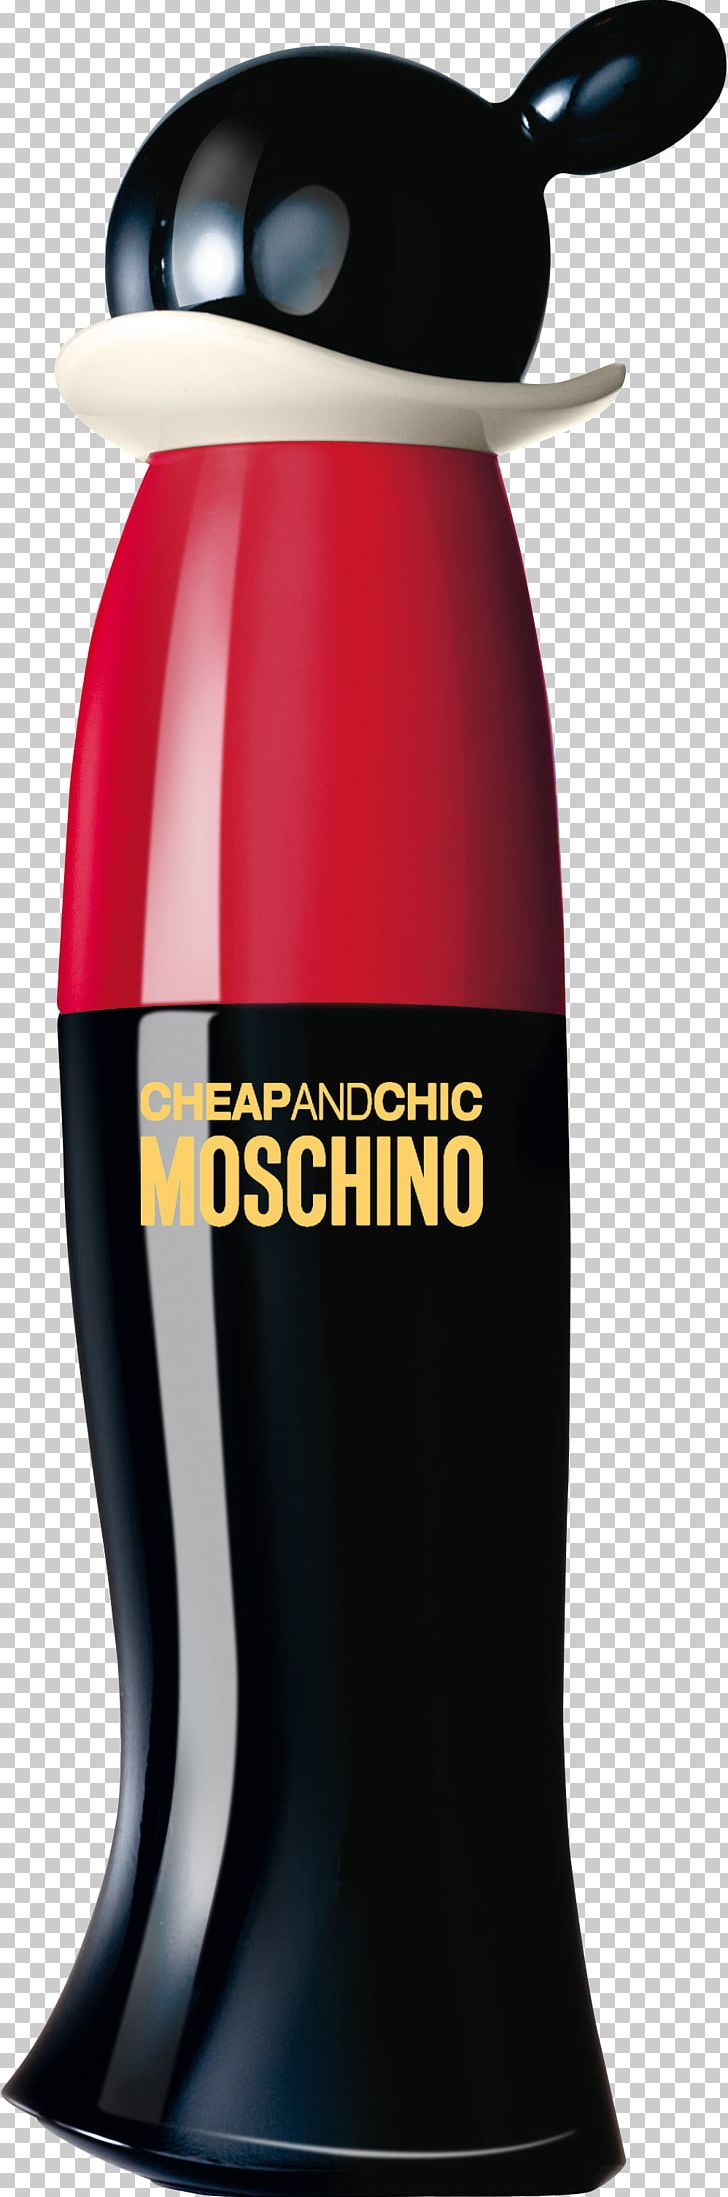 Cheap And Chic Moschino Perfume Eau De Toilette Fashion PNG, Clipart, Bottle, Cheap, Cheap And Chic, Chic, Drinkware Free PNG Download